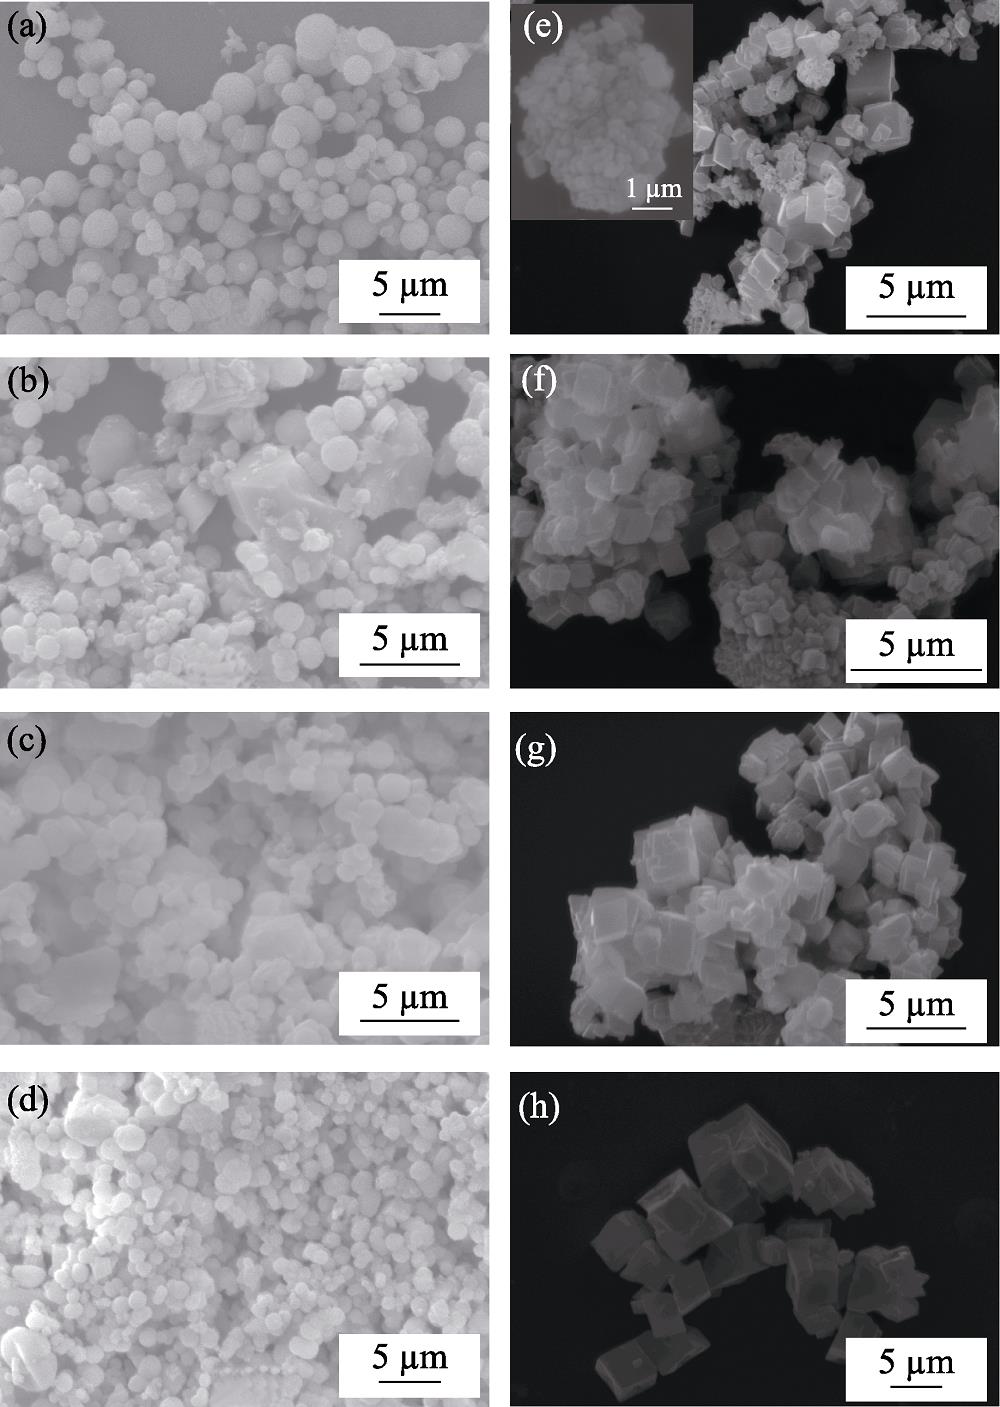 SEM images of CaCO3 prepared from ethanol-calcium method (a-d) and EWBS method (e-h) after aging for different times